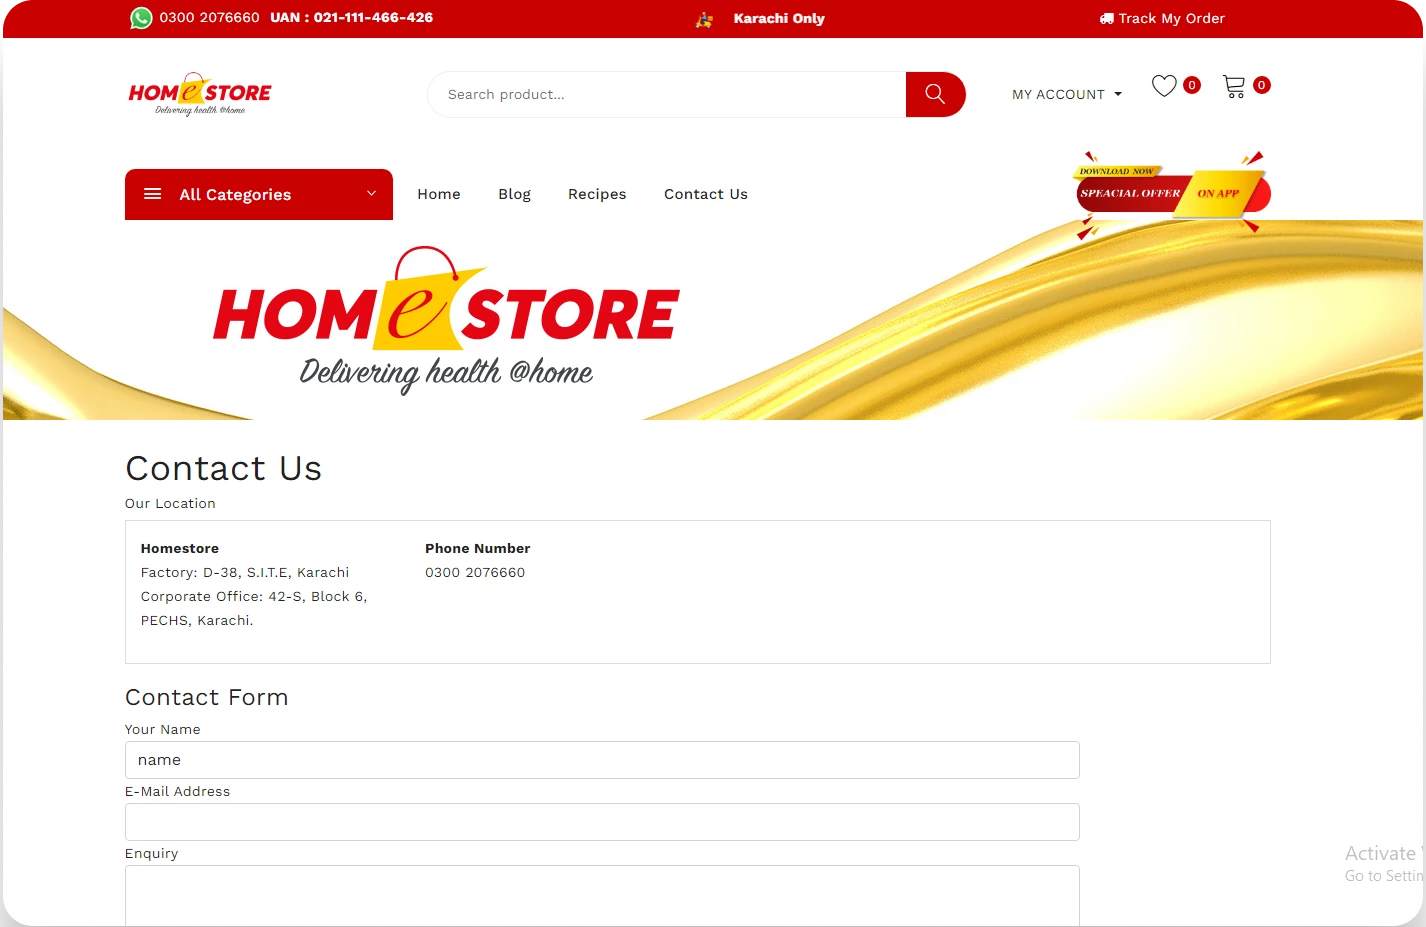 Home Store Contact Us Page